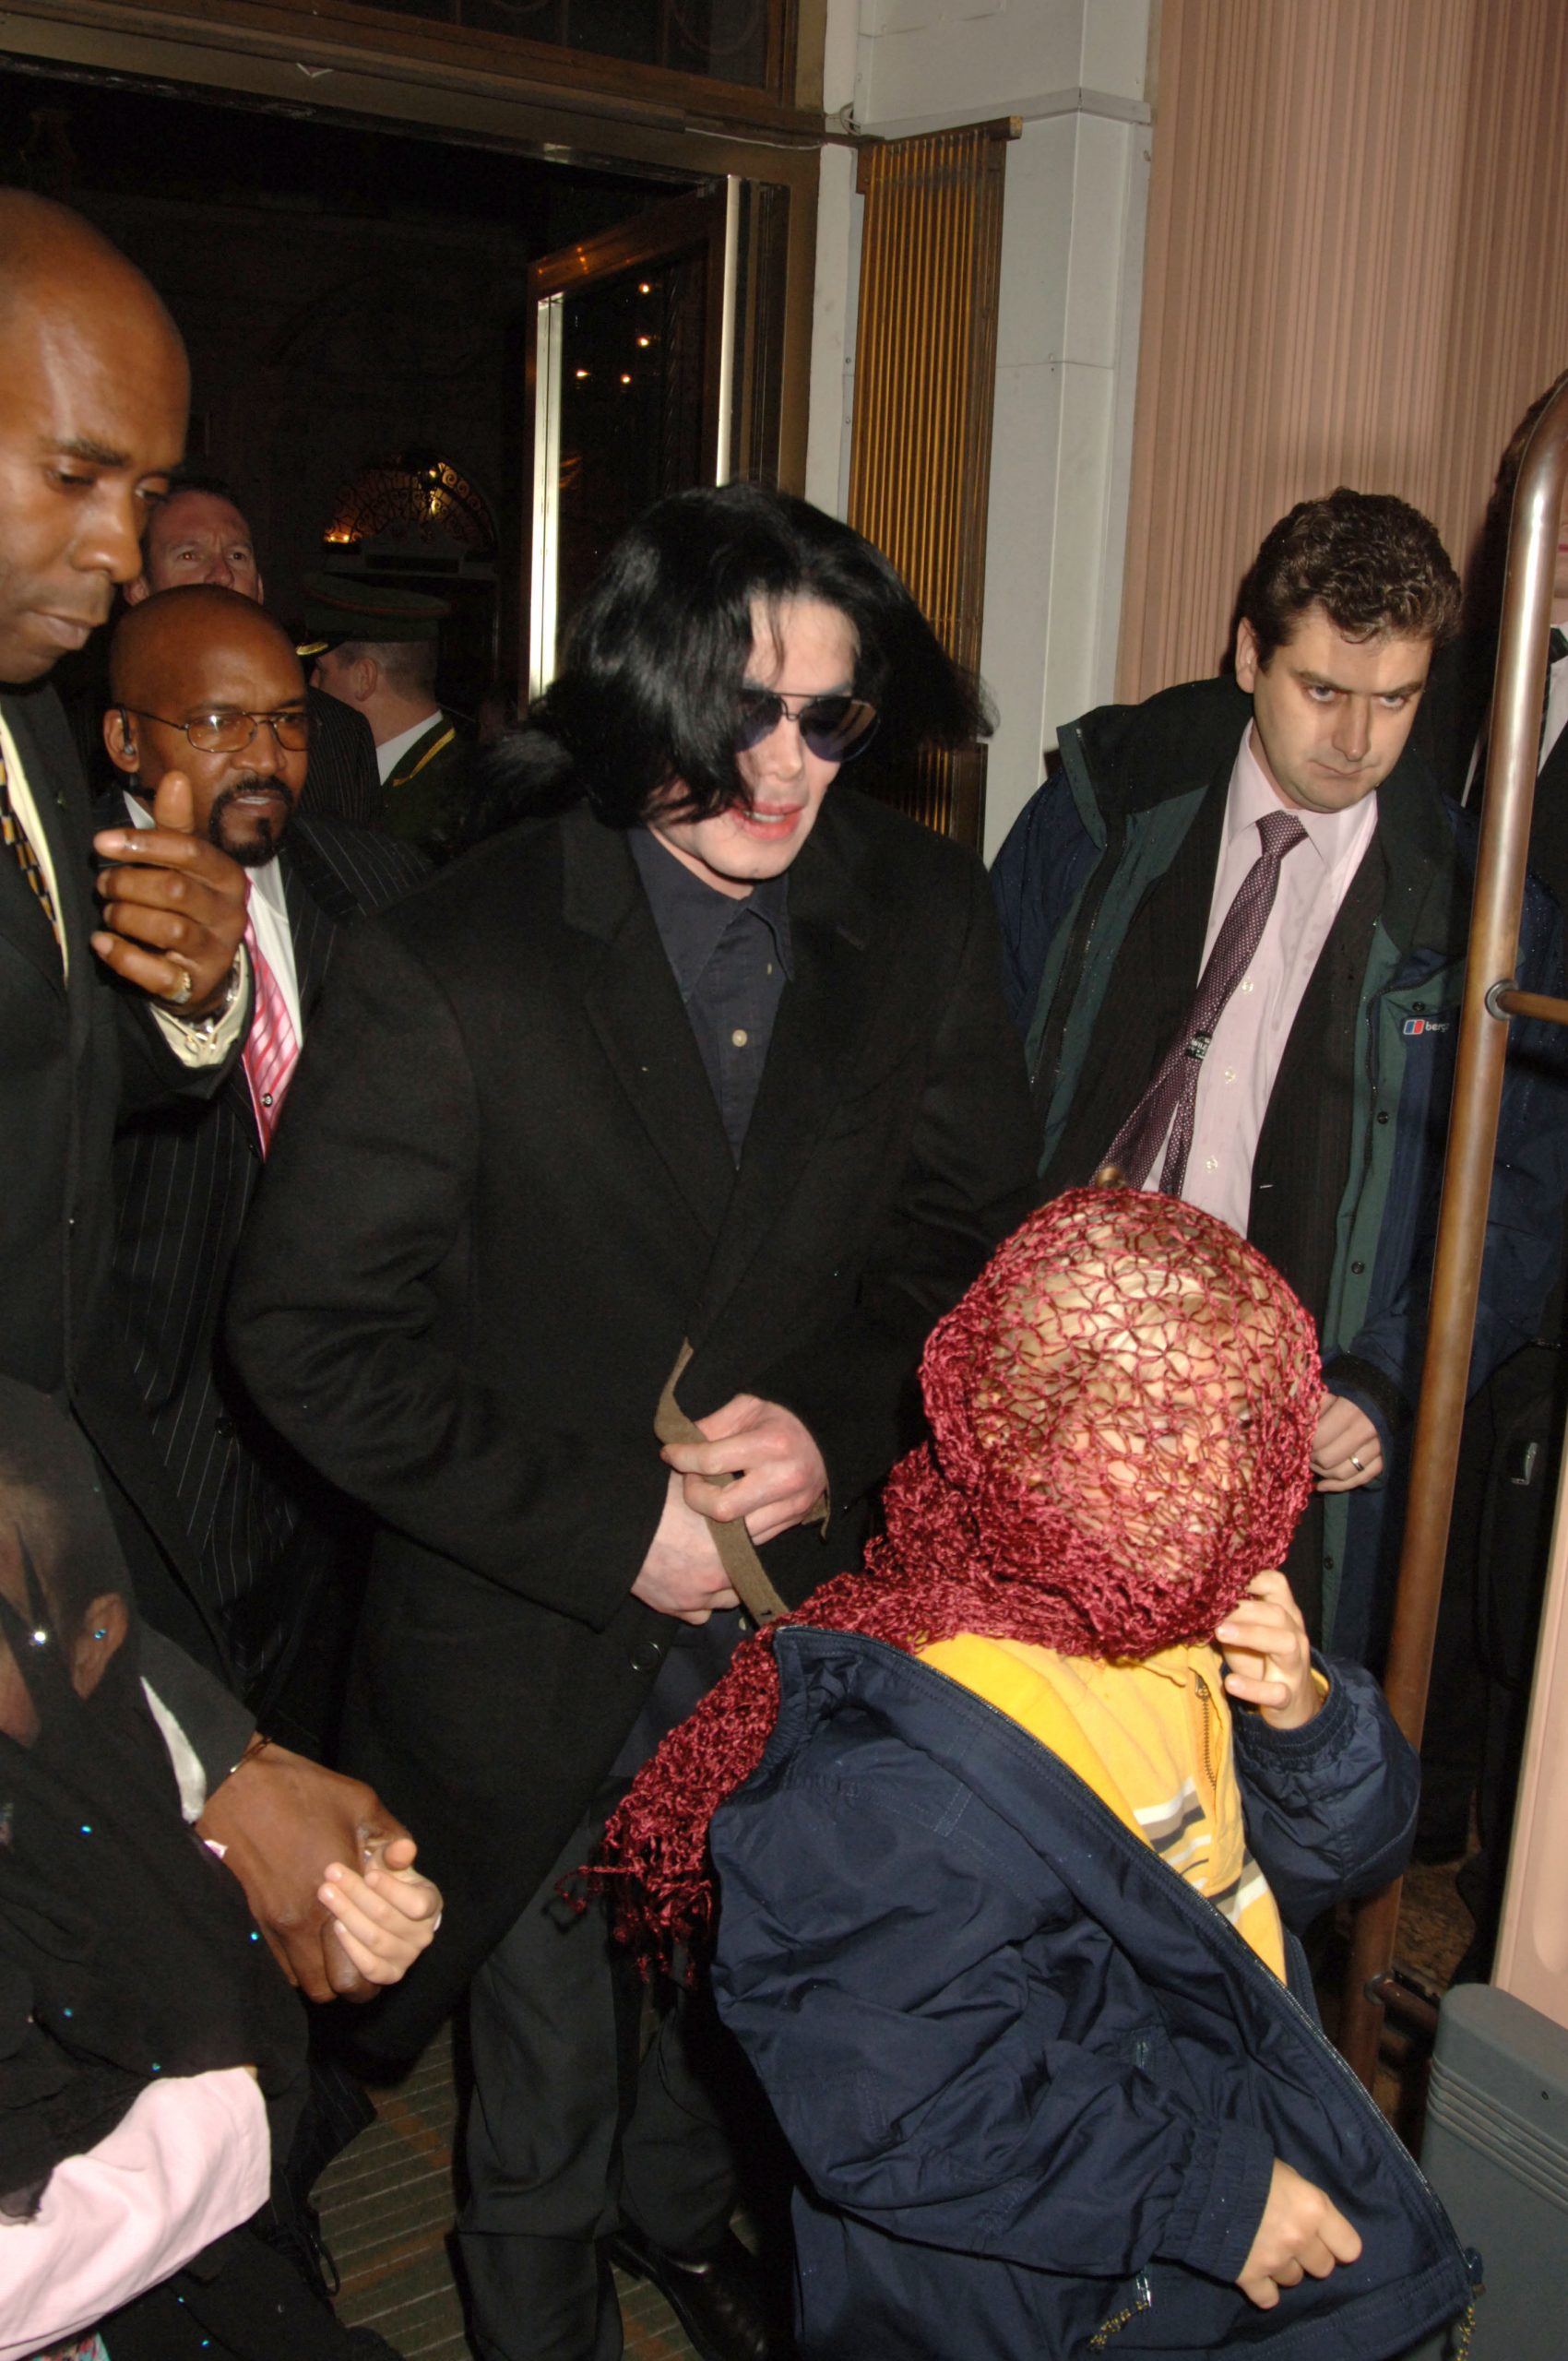 michael jackson and the kids with face coverings